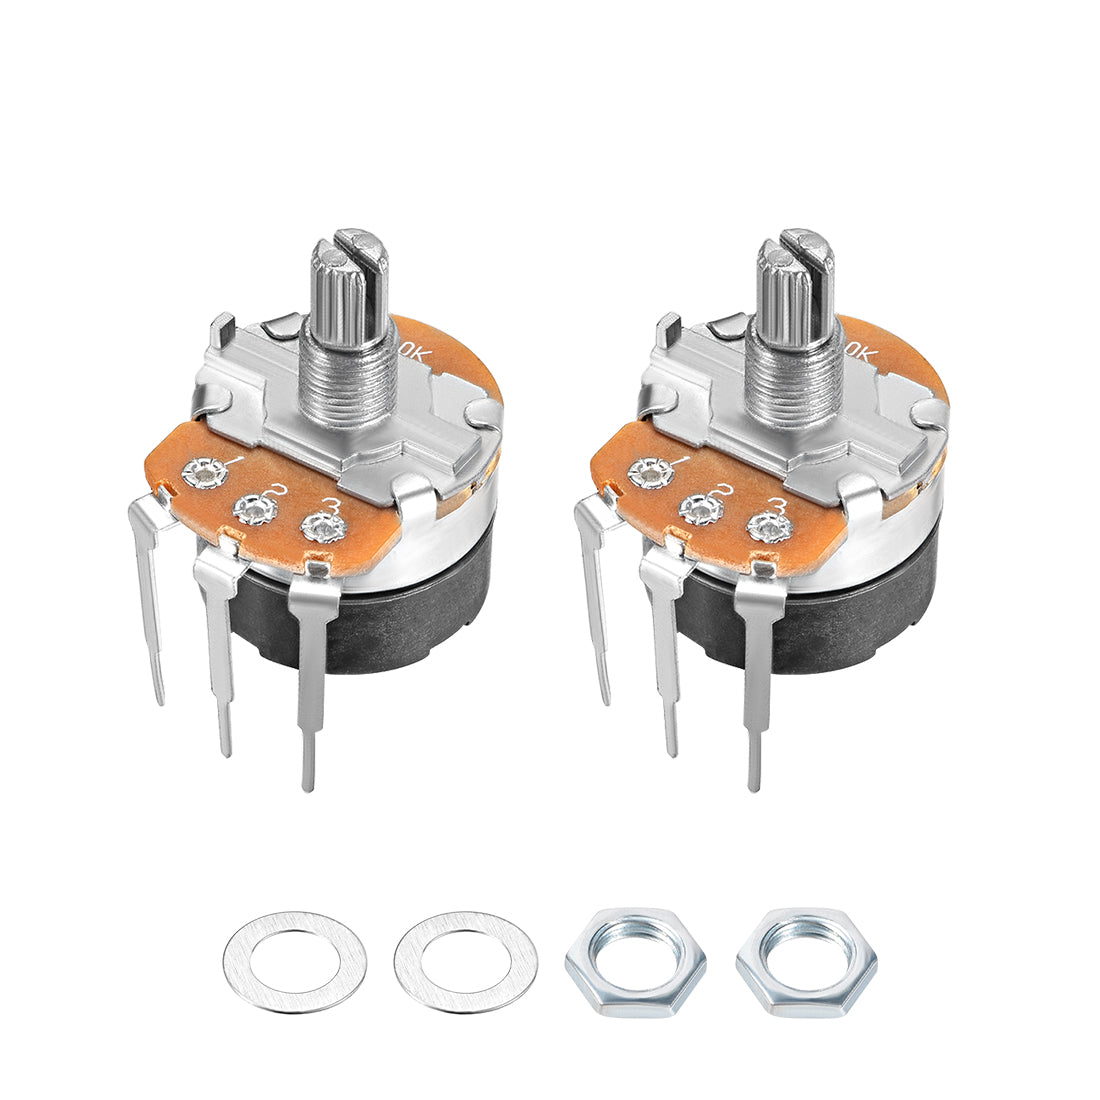 uxcell Uxcell WH138 Potentiometer with Switch 50K Ohm Variable Resistors Single Turn Rotary Carbon Film Taper 2pcs